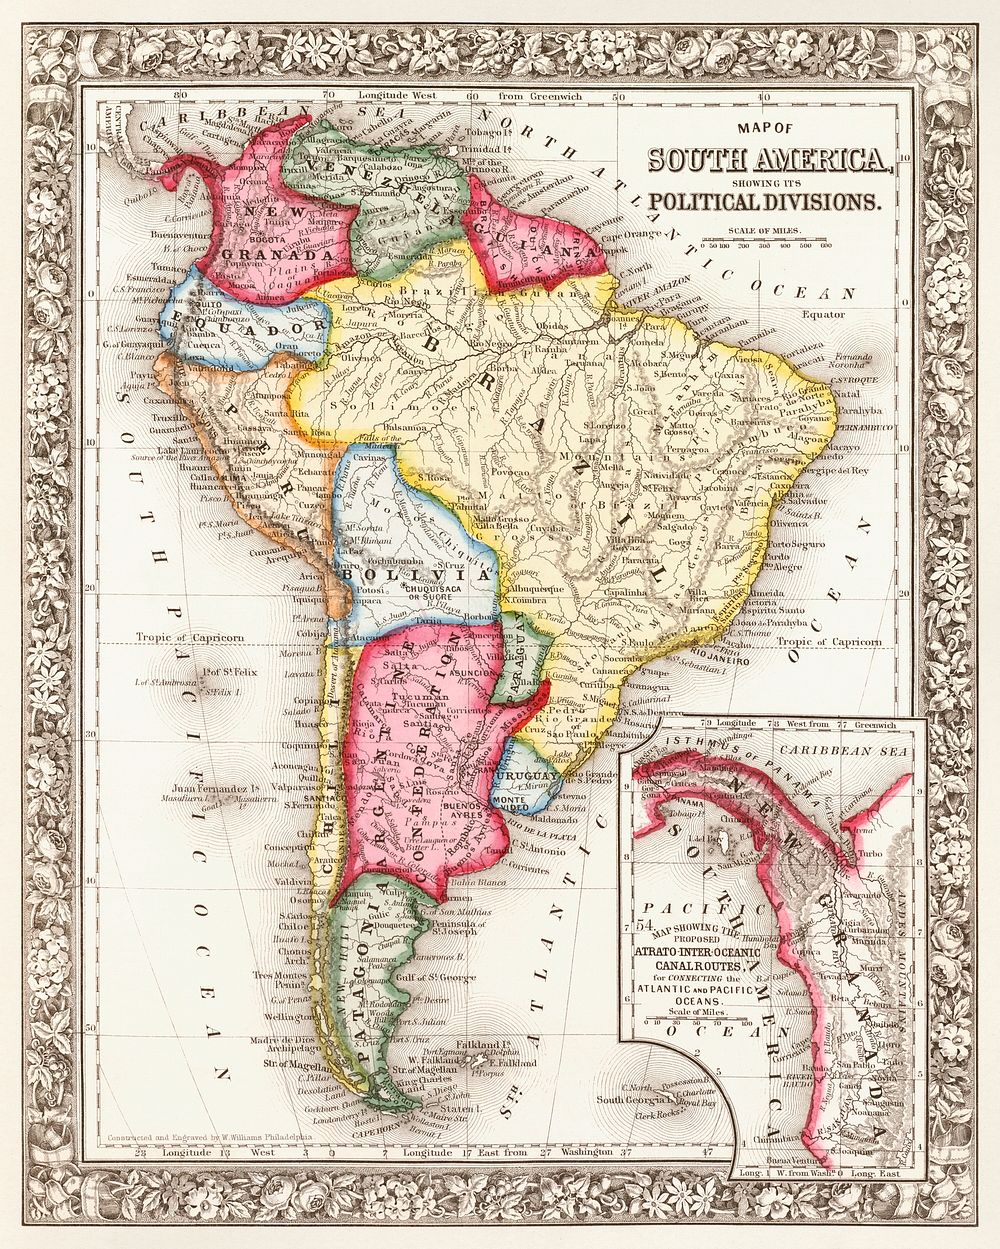 Map of South America, showing its political divisions; Map showing the proposed Atrato-inter-oceanic canalroutes, for…